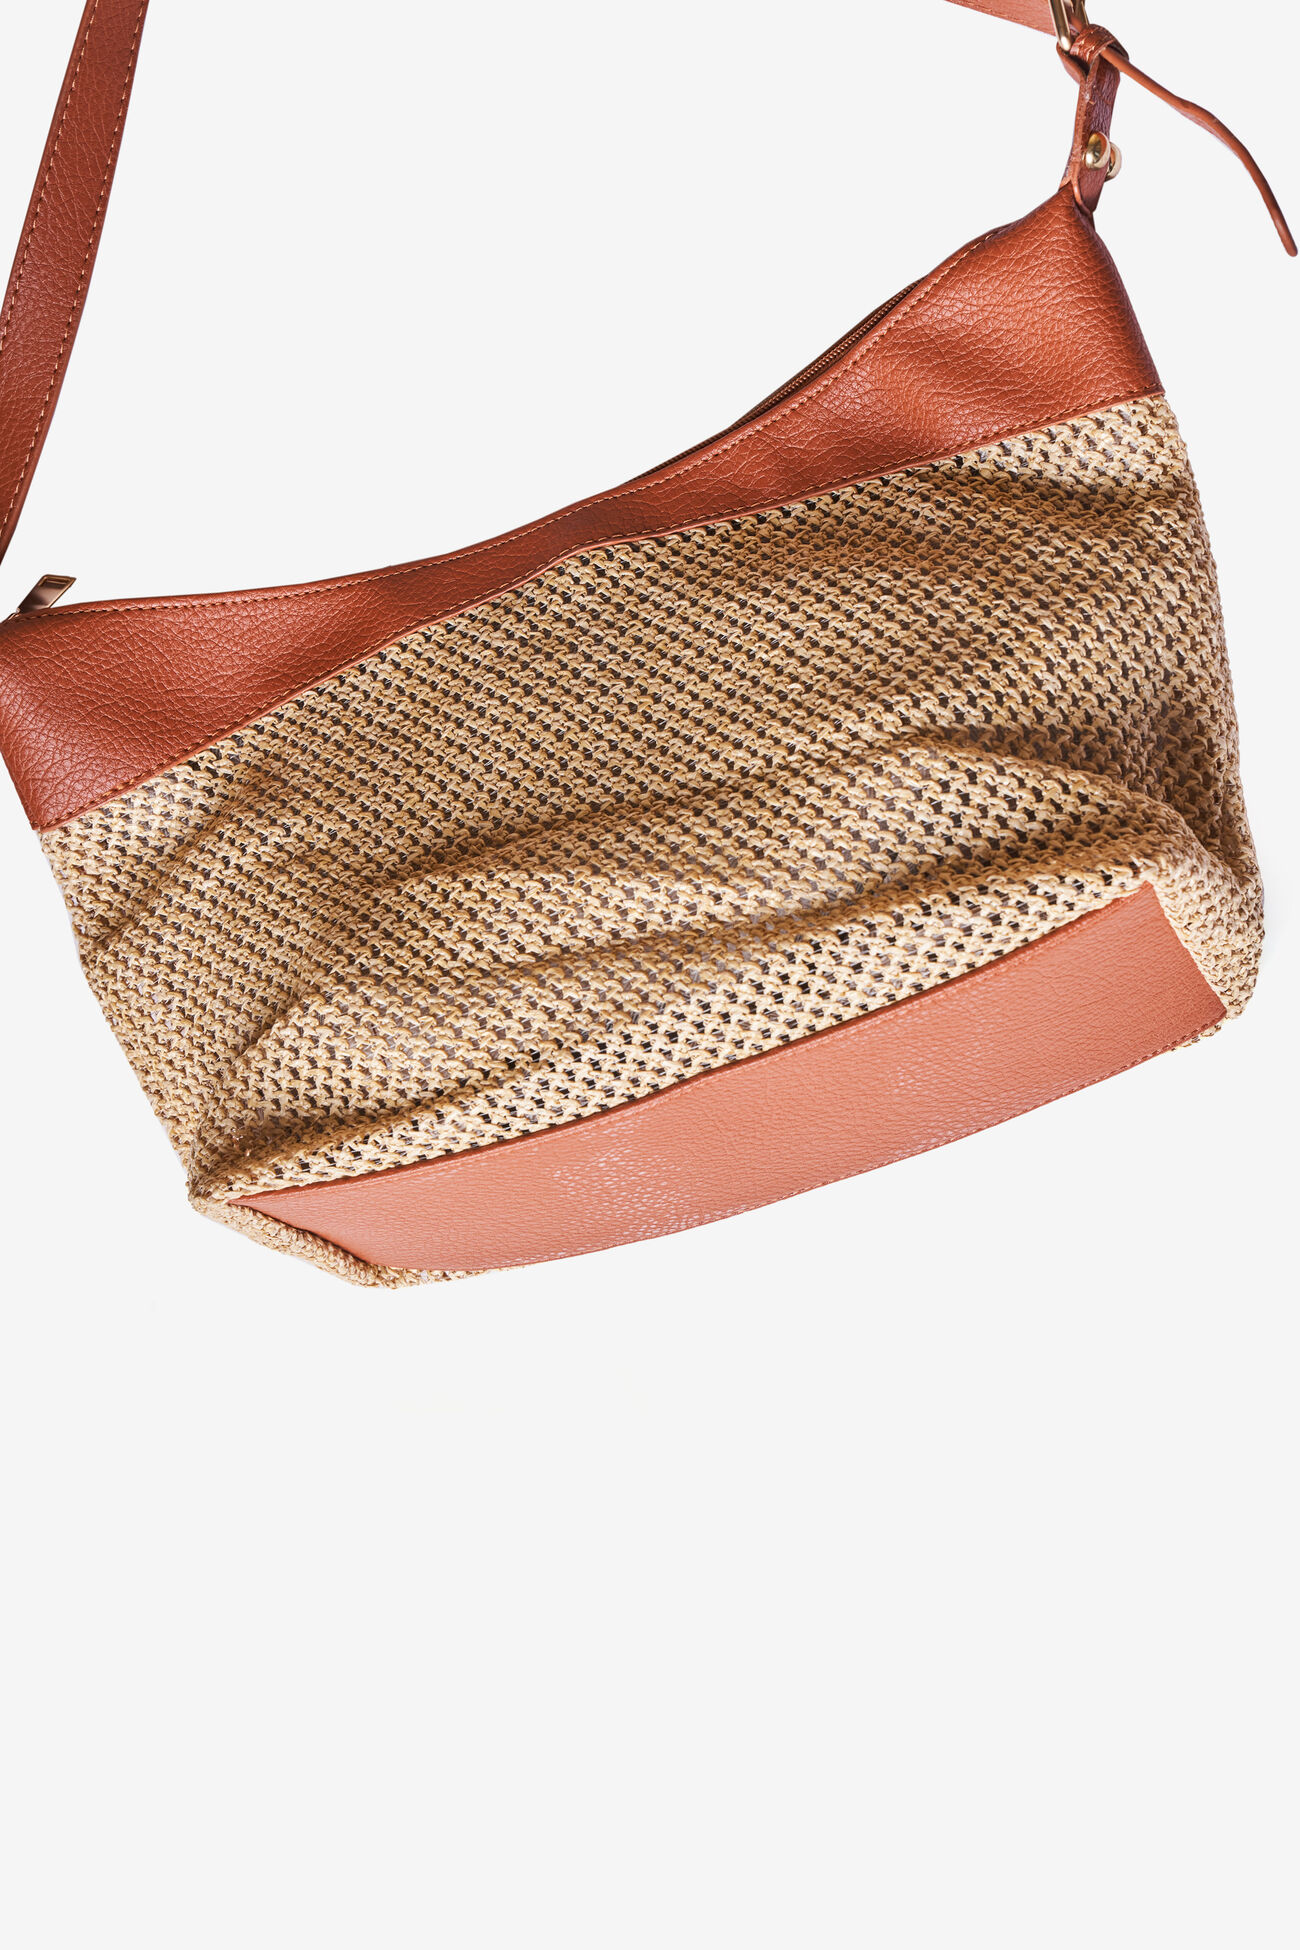 Russet Touch Bag, , image 5